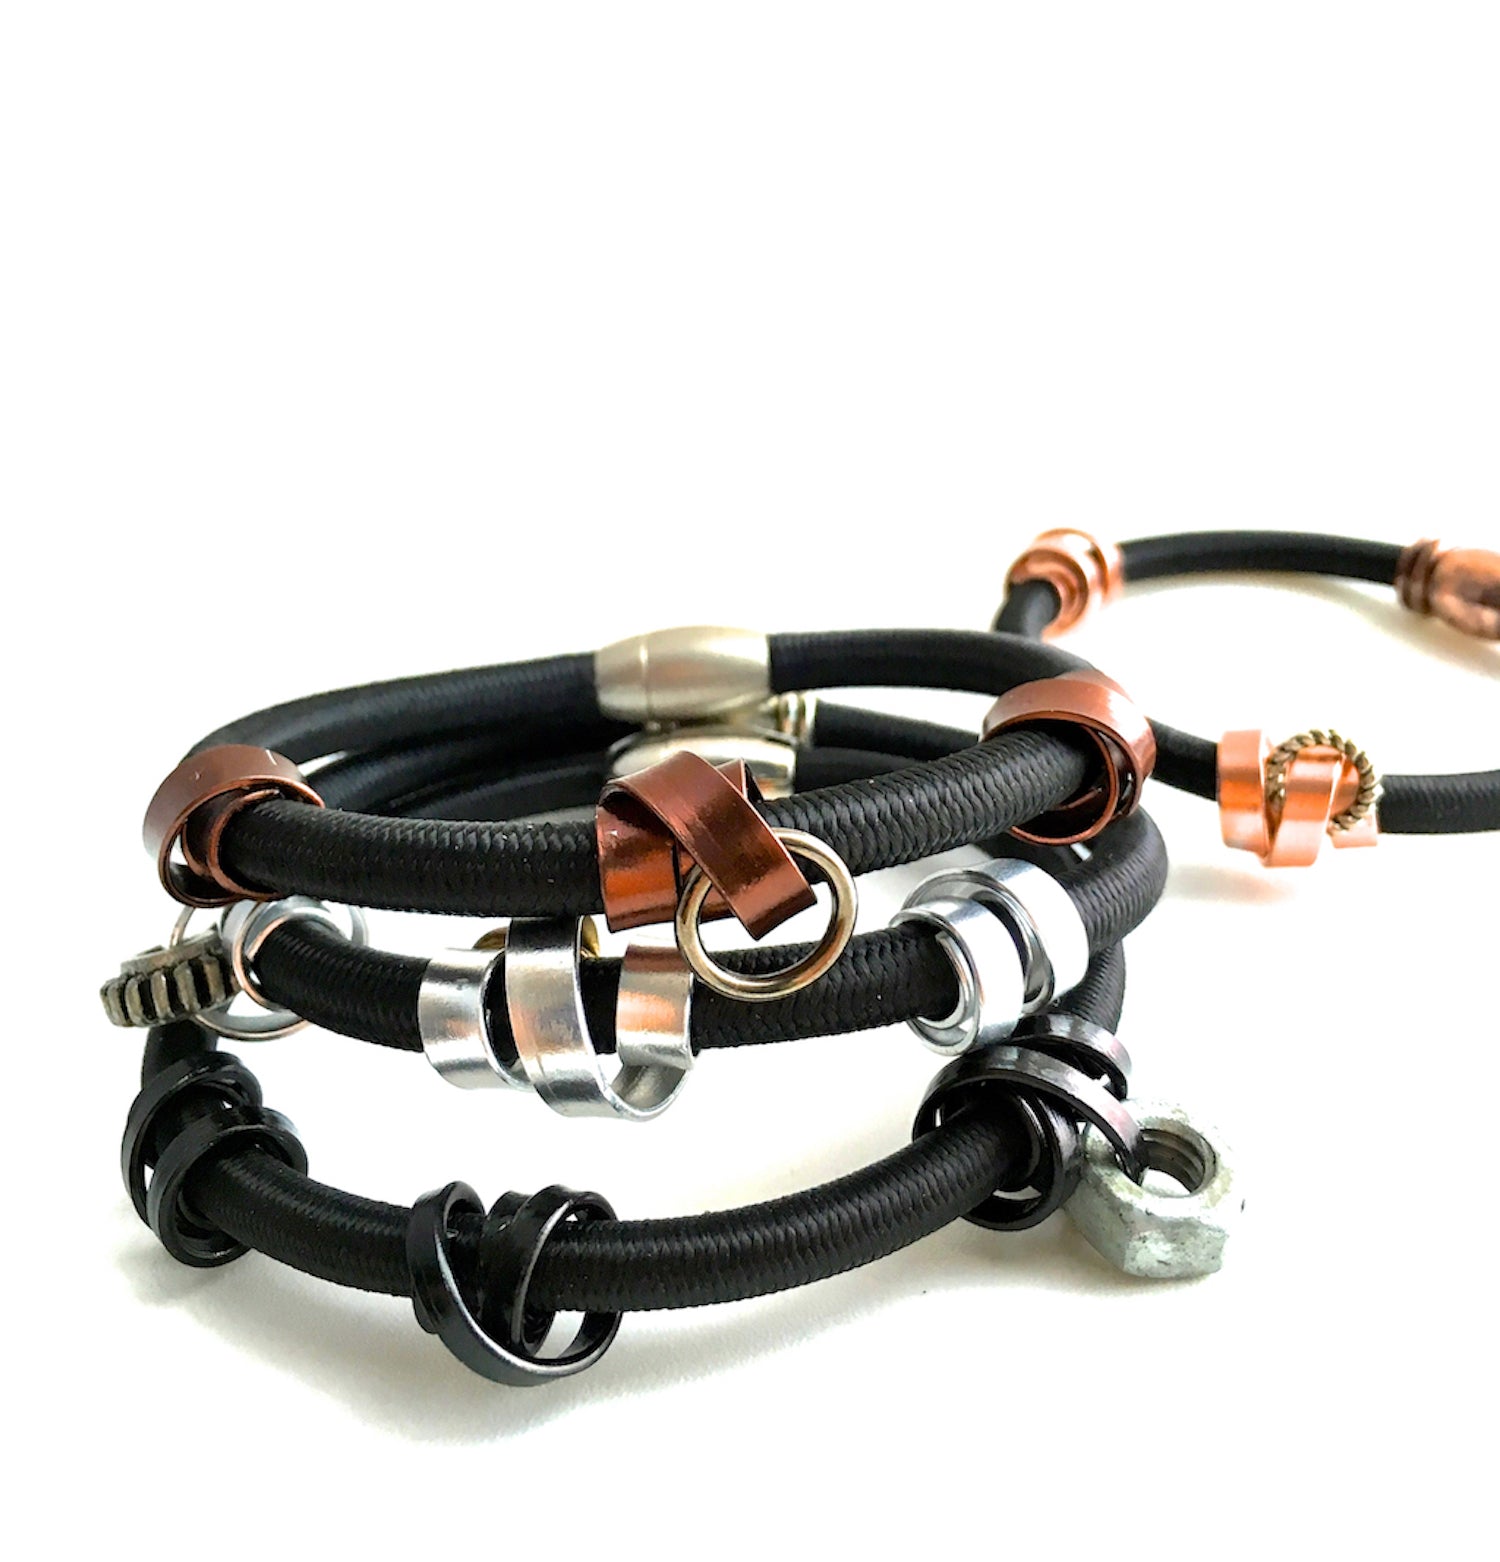 Mix of 4 Loopt bracelets in flat copper, flat bronze, flat silver and thin black on heavy cord.